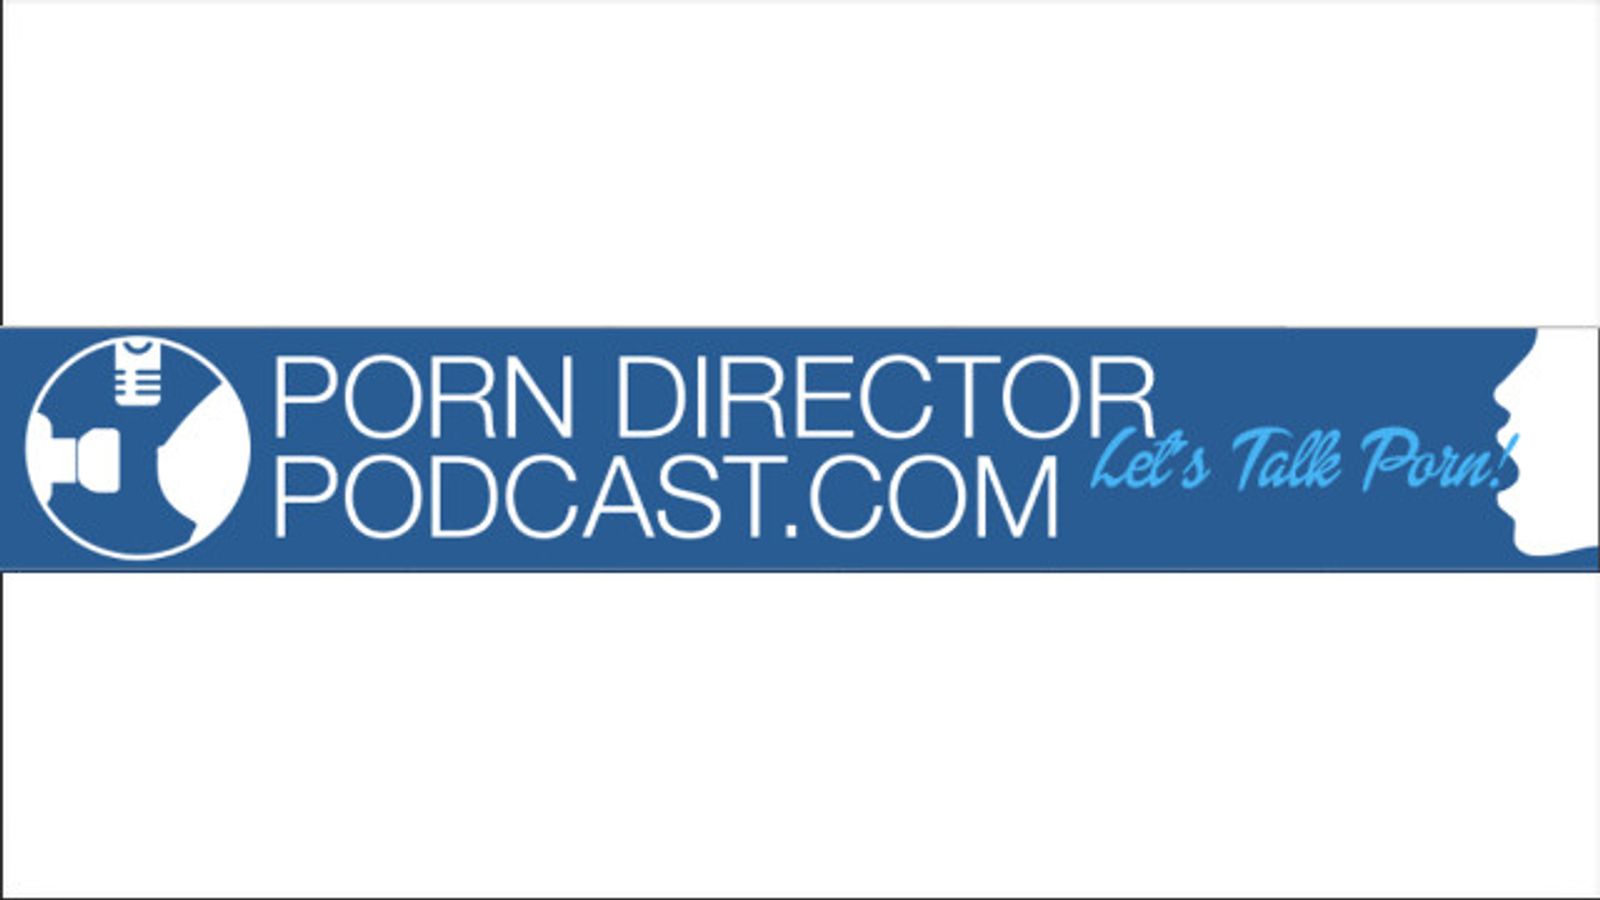 'Porn Director Podcast' Shines Positive Light on Adult